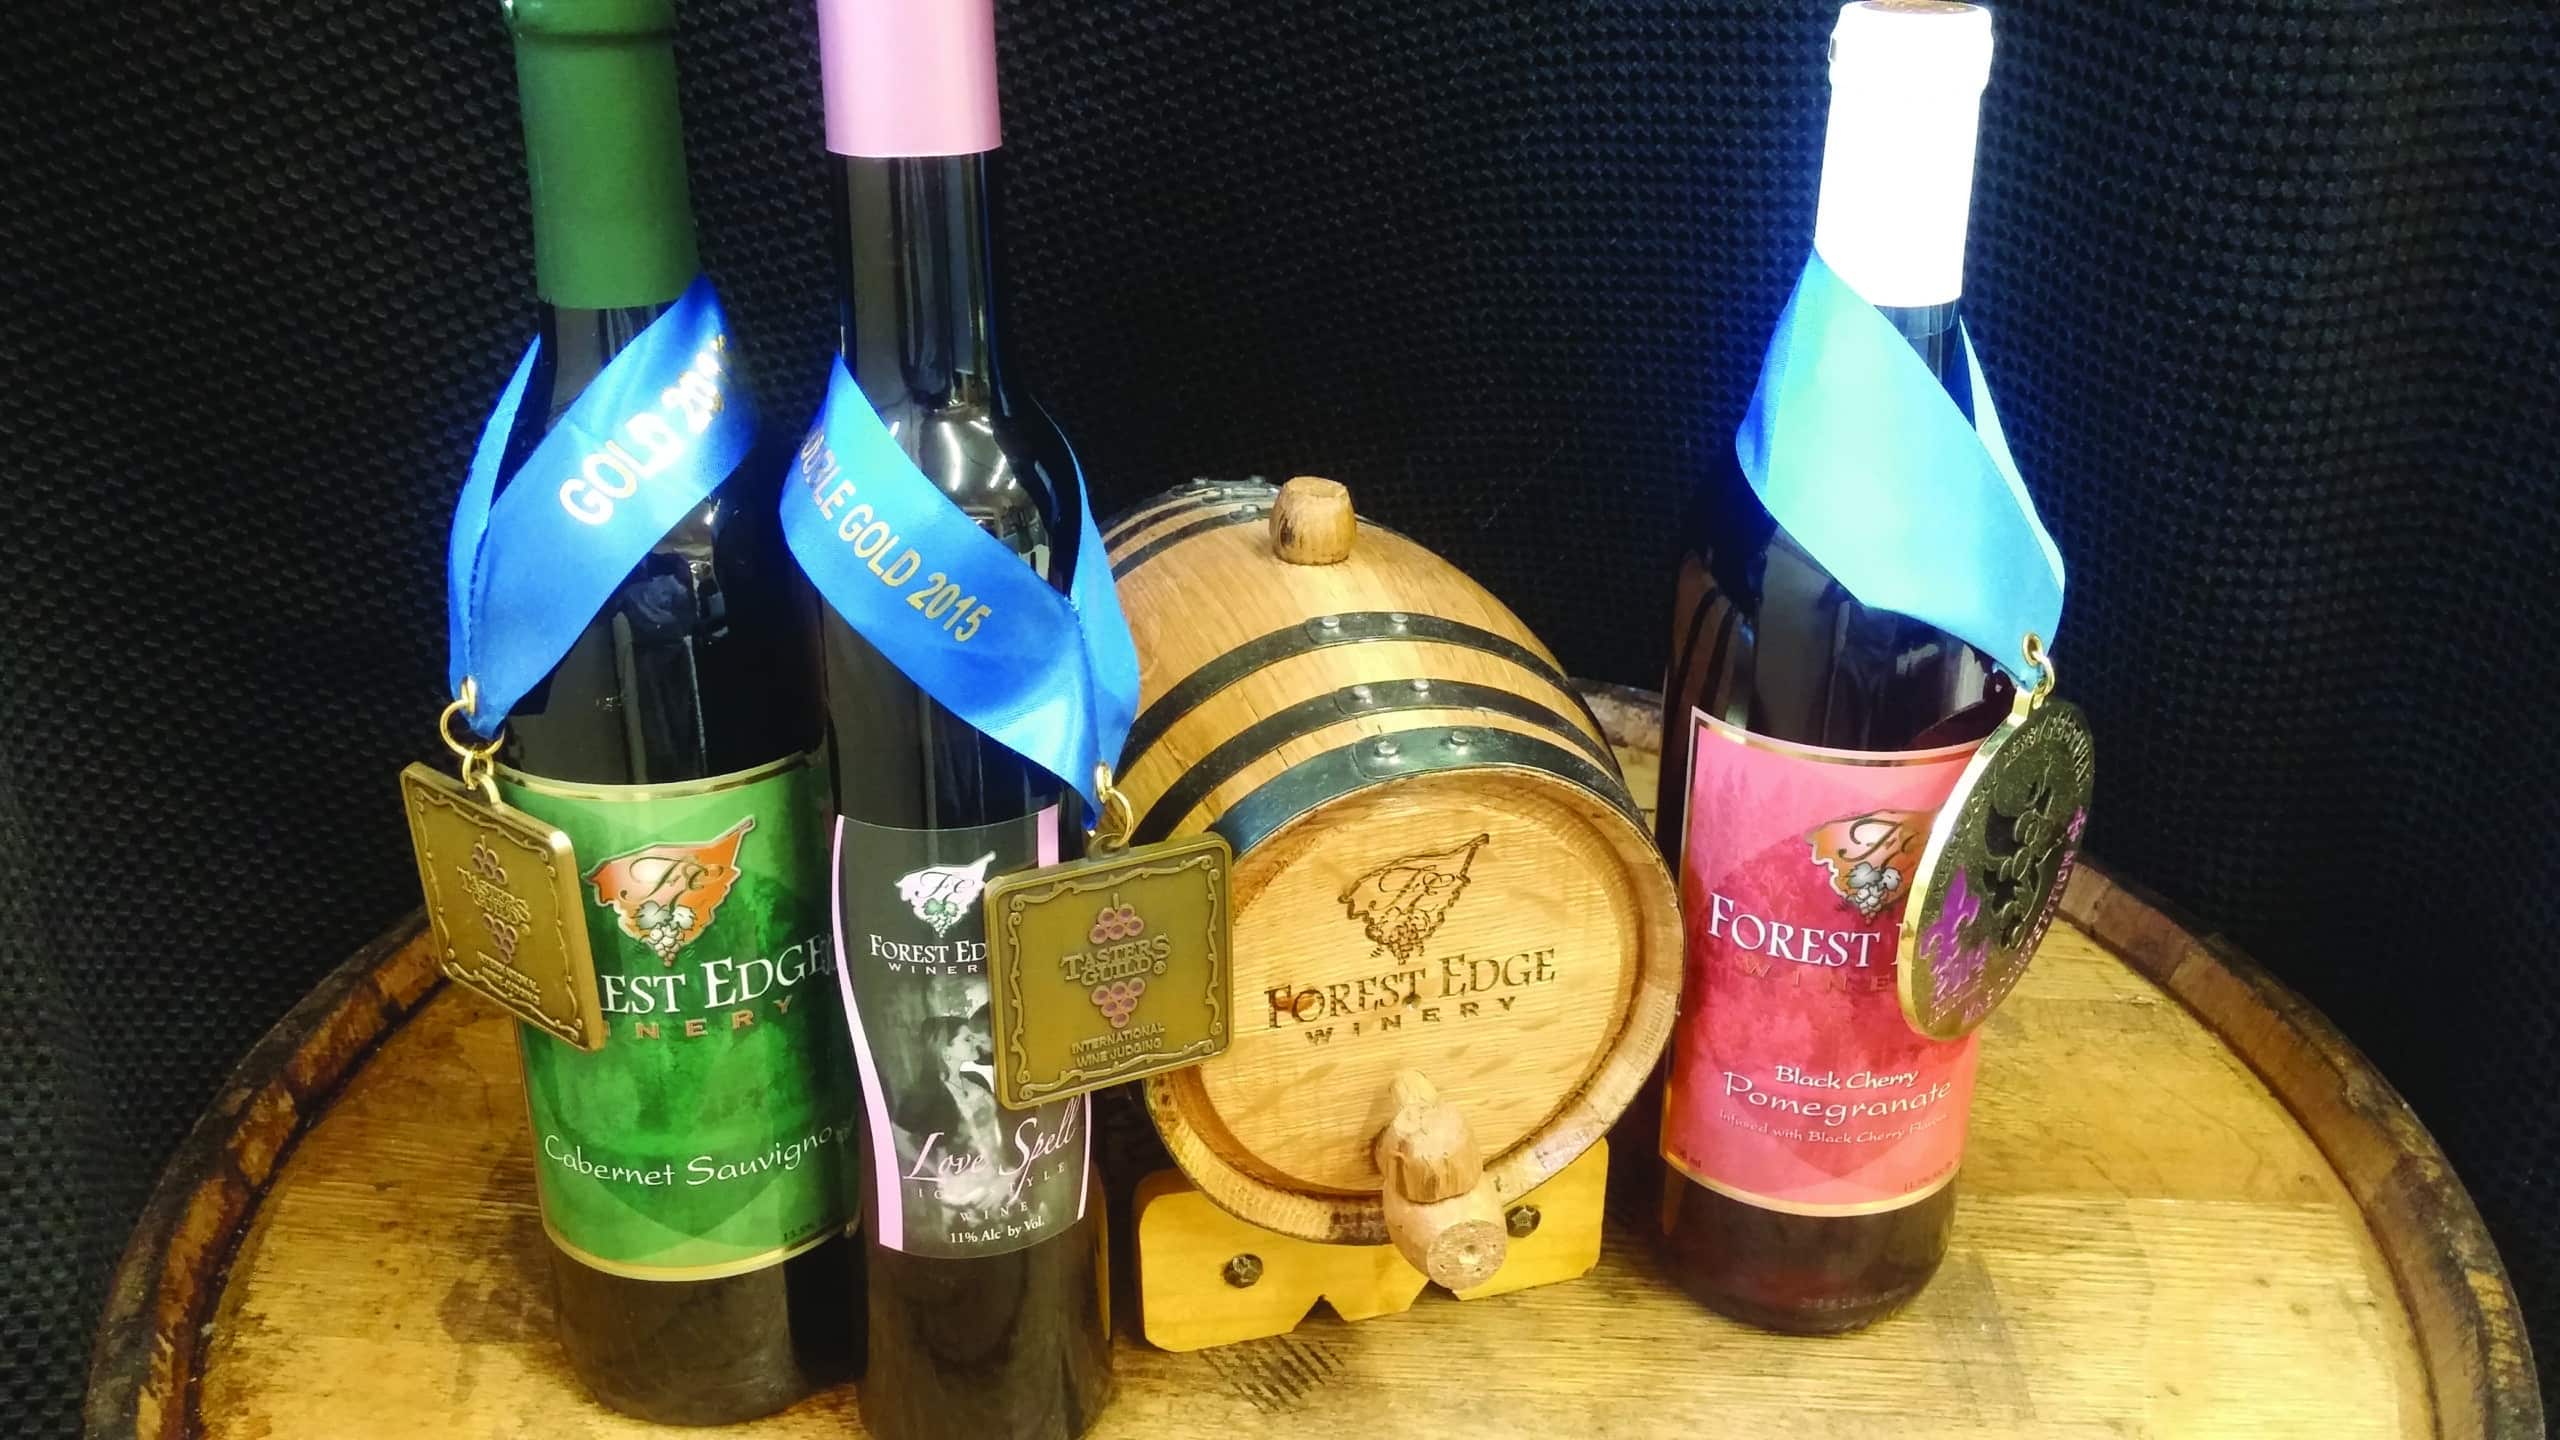 Forest Edge Winery bottle with awards